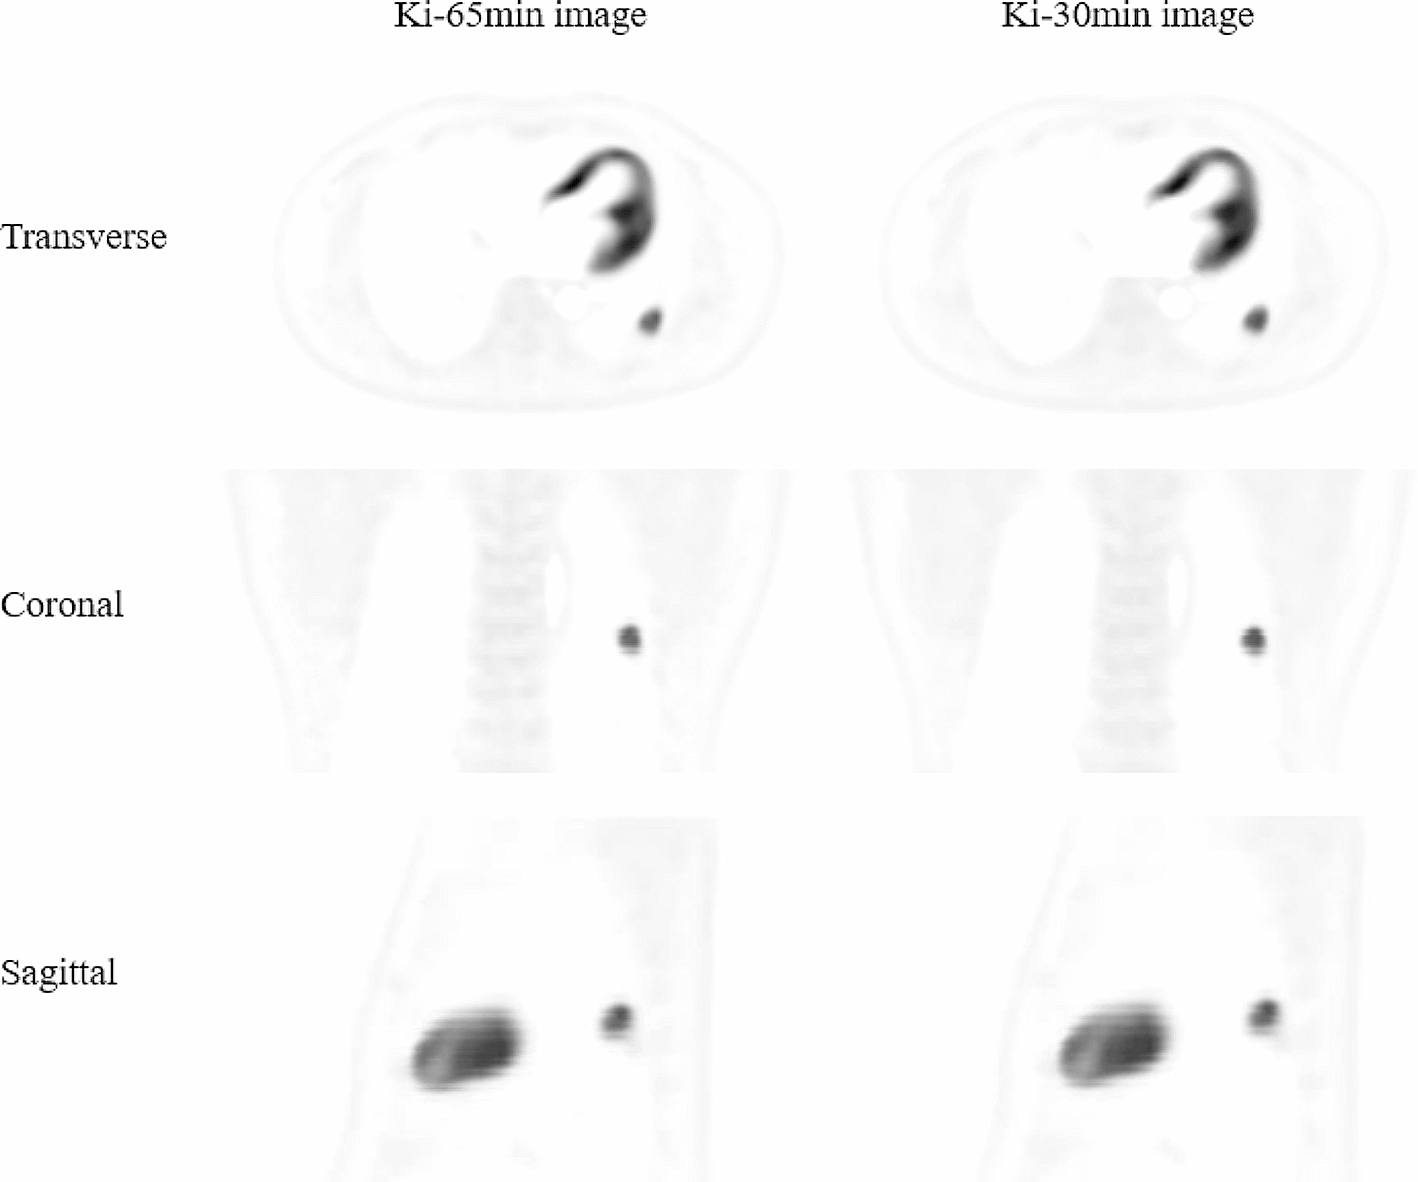 Clinical feasibility study of early 30-minute dynamic FDG-PET scanning protocol for patients with lung lesions